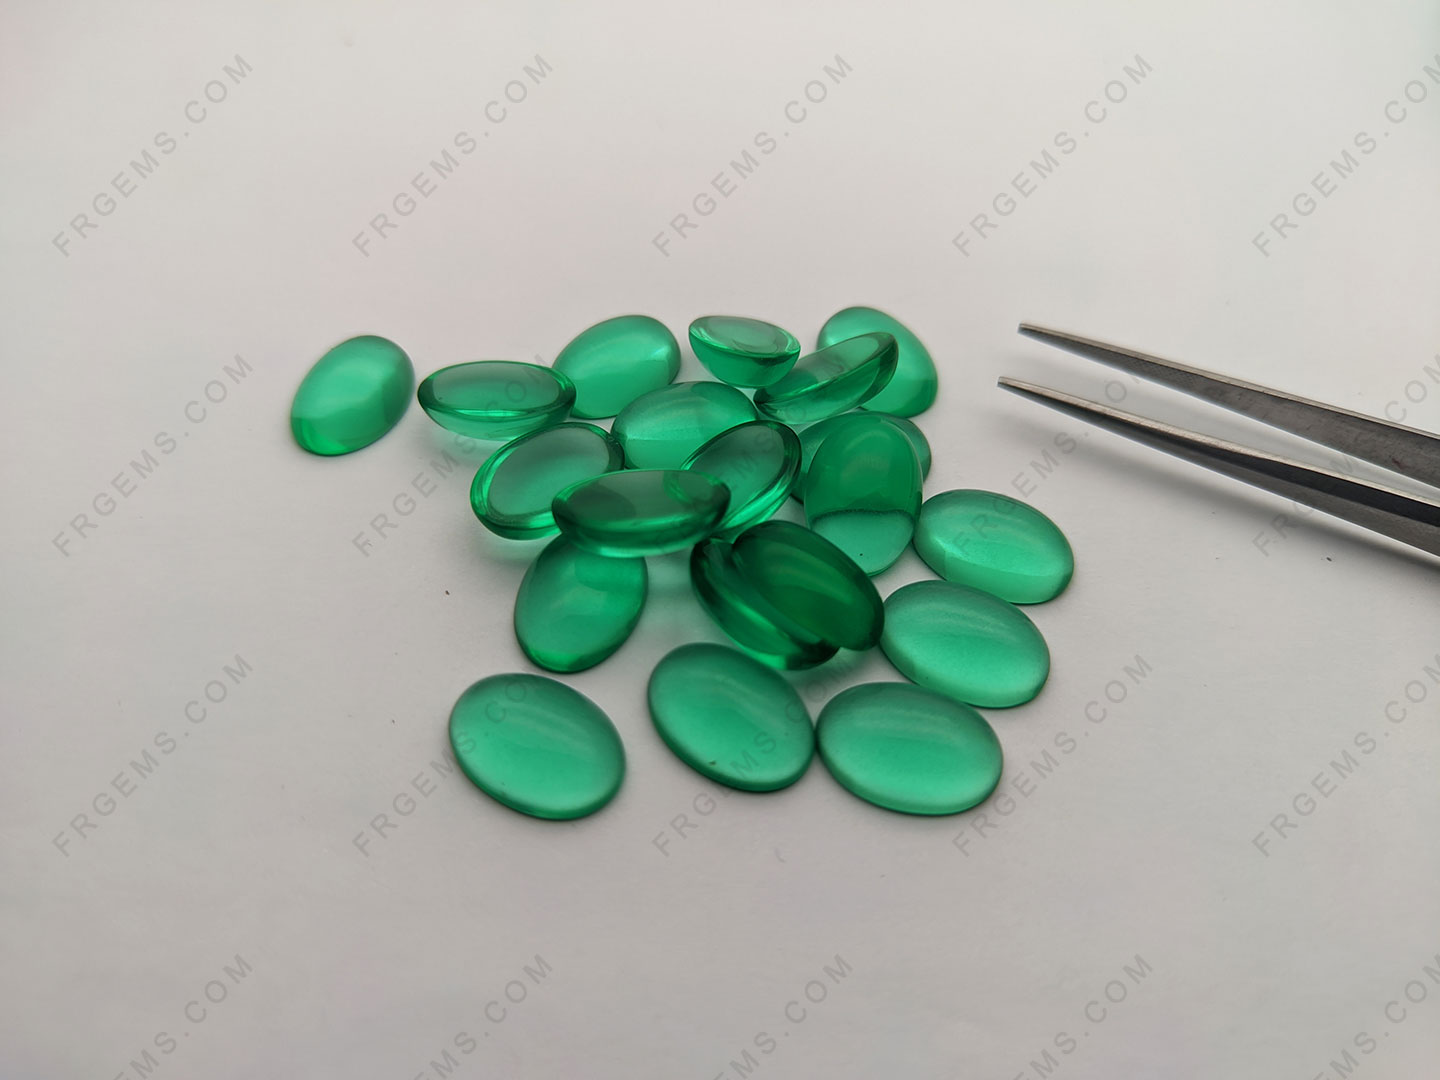 wholesale Glass Emerald Green blueish Color Oval Shape Cabochon Loose Gemstones